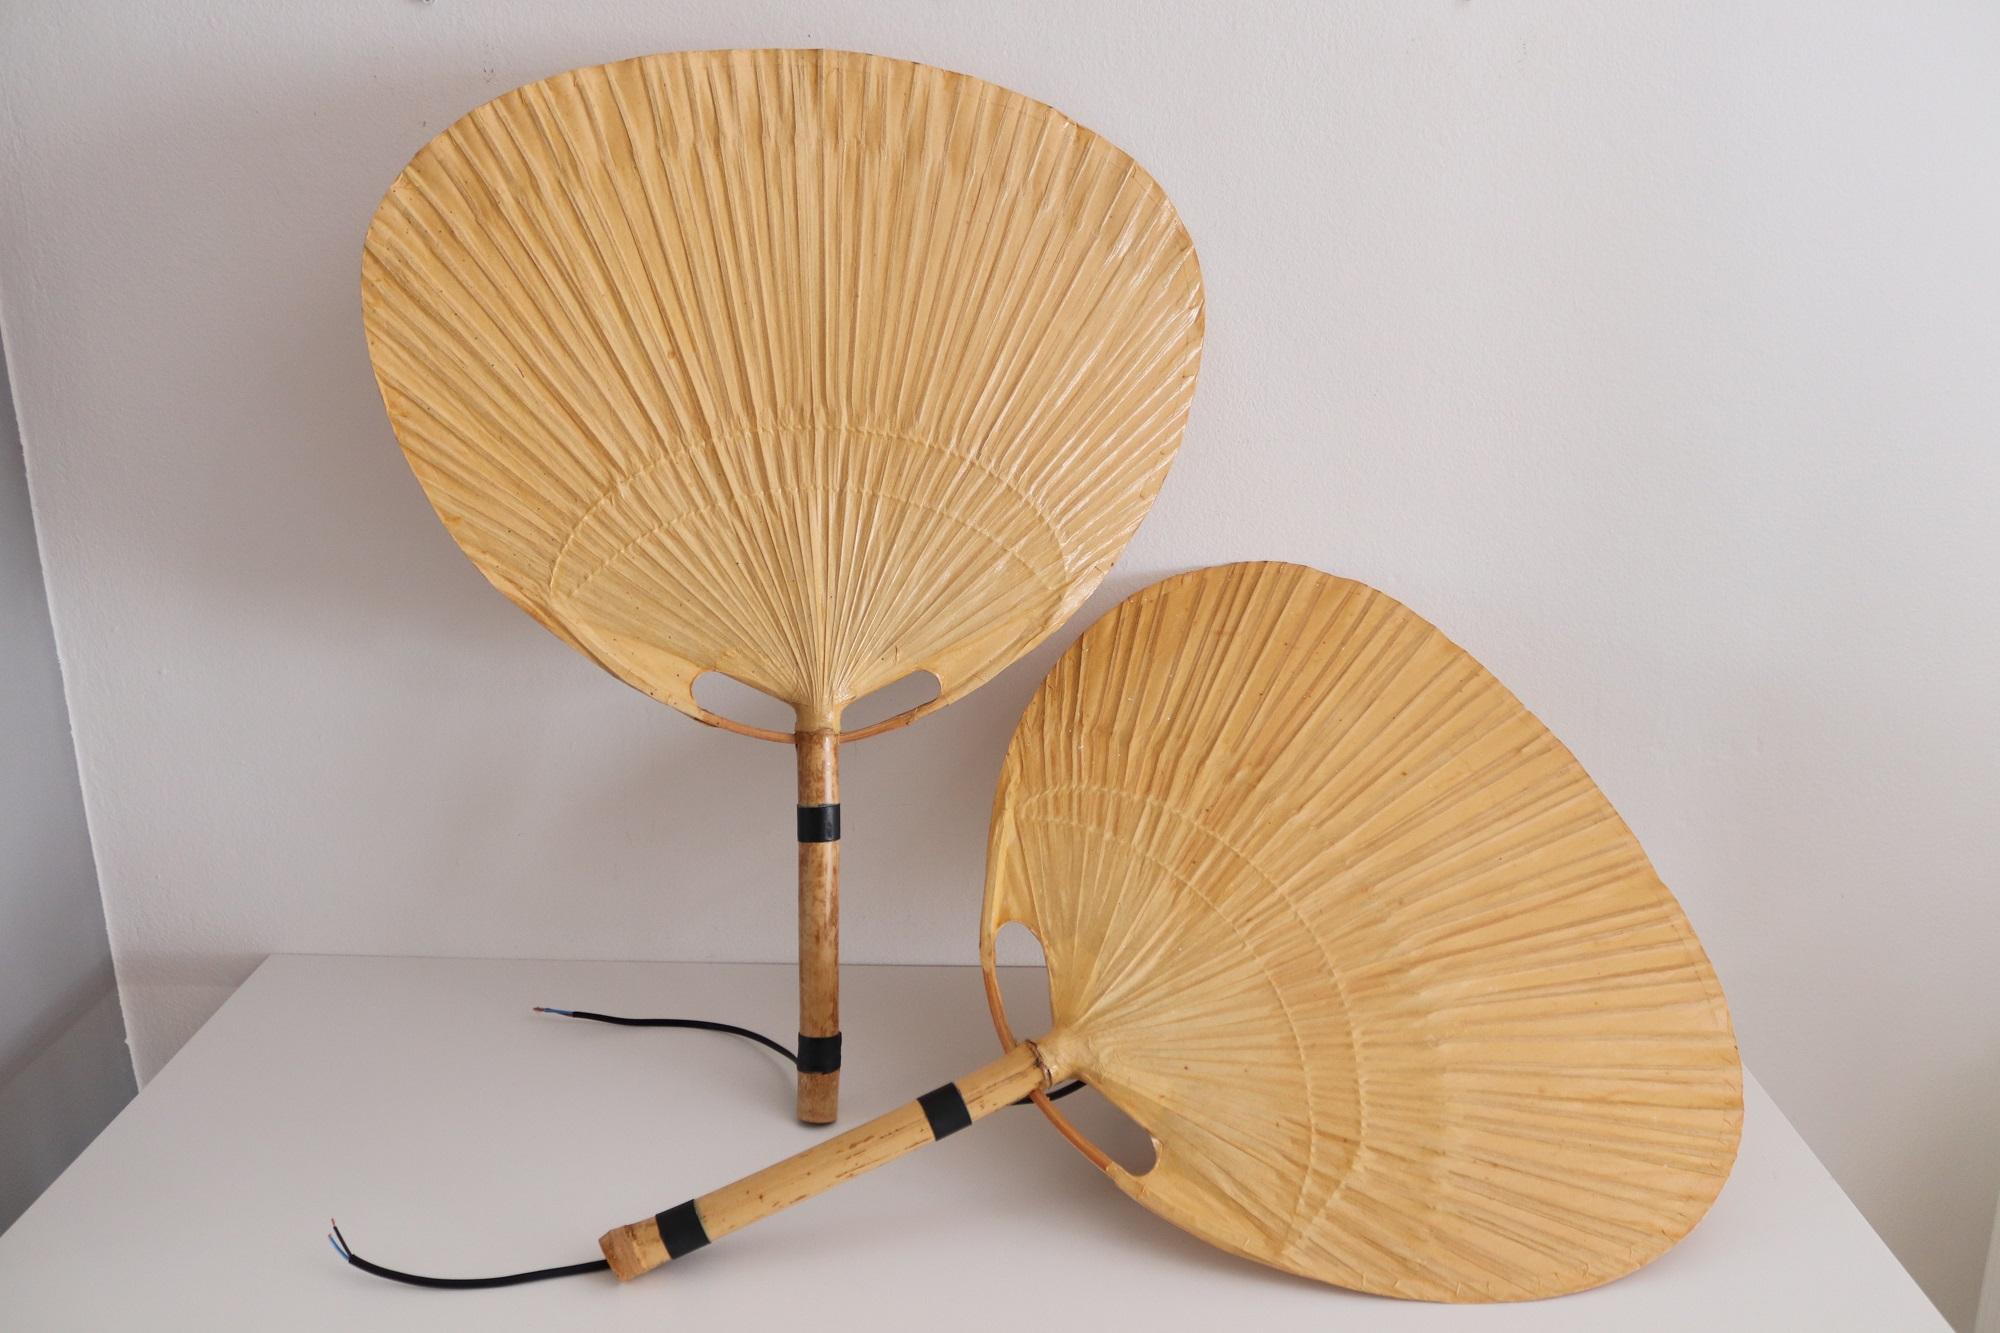 Two pieces of big vintage Uchiwa fan lamps with metal holder for wall hanging.
Designed from Ingo Maurer, Germany in 1973. One of two lights is equipped with original label 